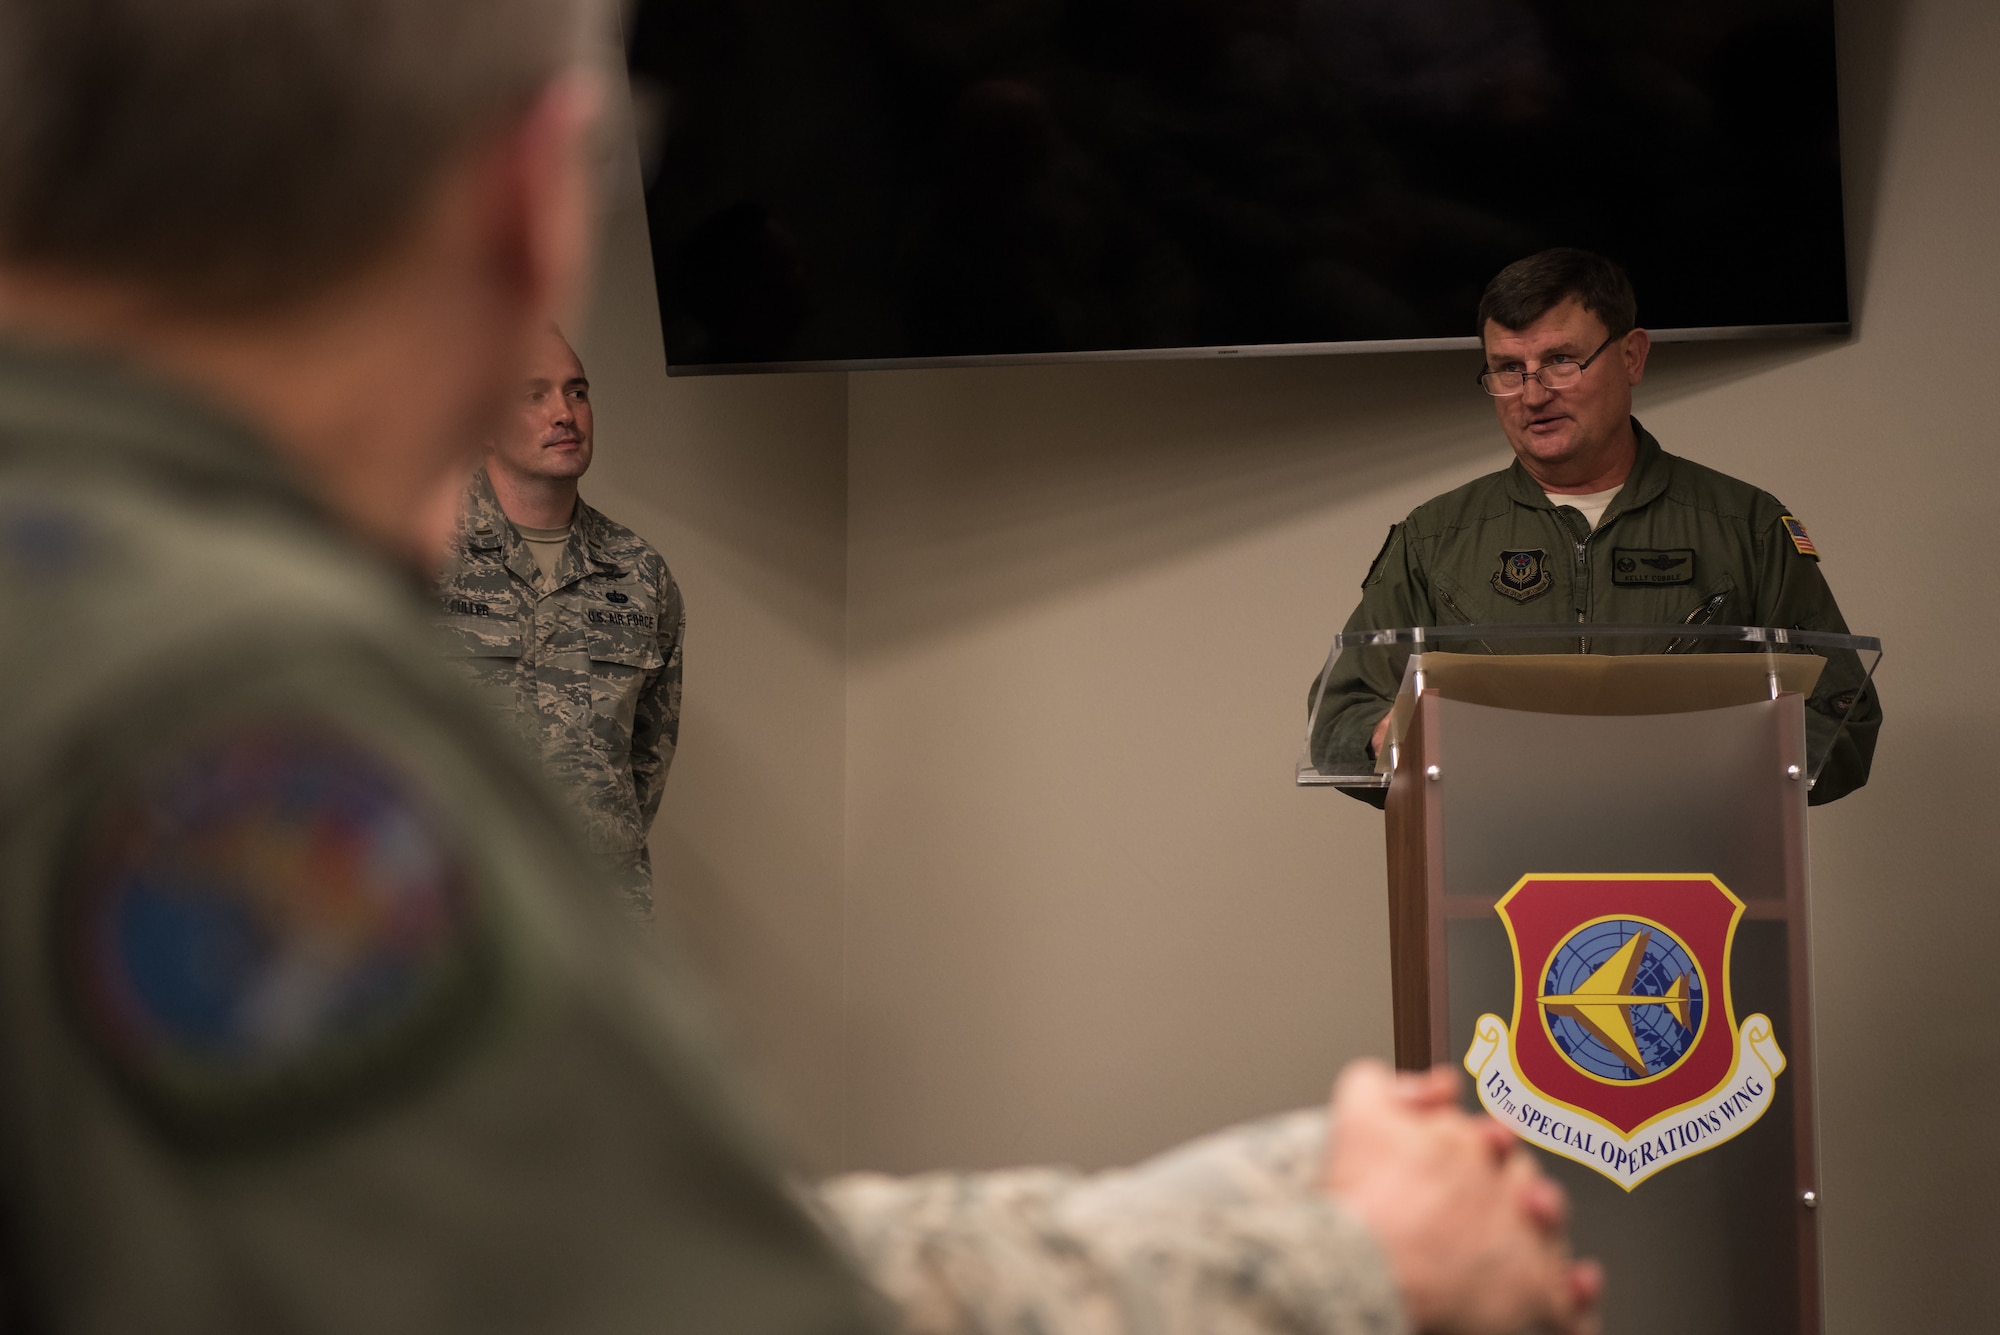 Col. Kelly W. Cobble, exiting commander of the 137th Special Operations Group, speaks to attendees of the Group’s change of command ceremony at Will Rogers Air National Guard Base in Oklahoma City, May 17, 2018. Col. Daniel R. “Pinto” Fowler, formerly the Air National Guard's Advisor to U.S. Air Force Special Operations Command, Hurlbert Field, Fla., assumed command with more than 20 years of military experience, including three years as a Joint Terminal Attack Control qualified Air Liaison Officer and 12 years of flying. (U.S. Air National Guard photo by Staff Sgt. Kasey Phipps)